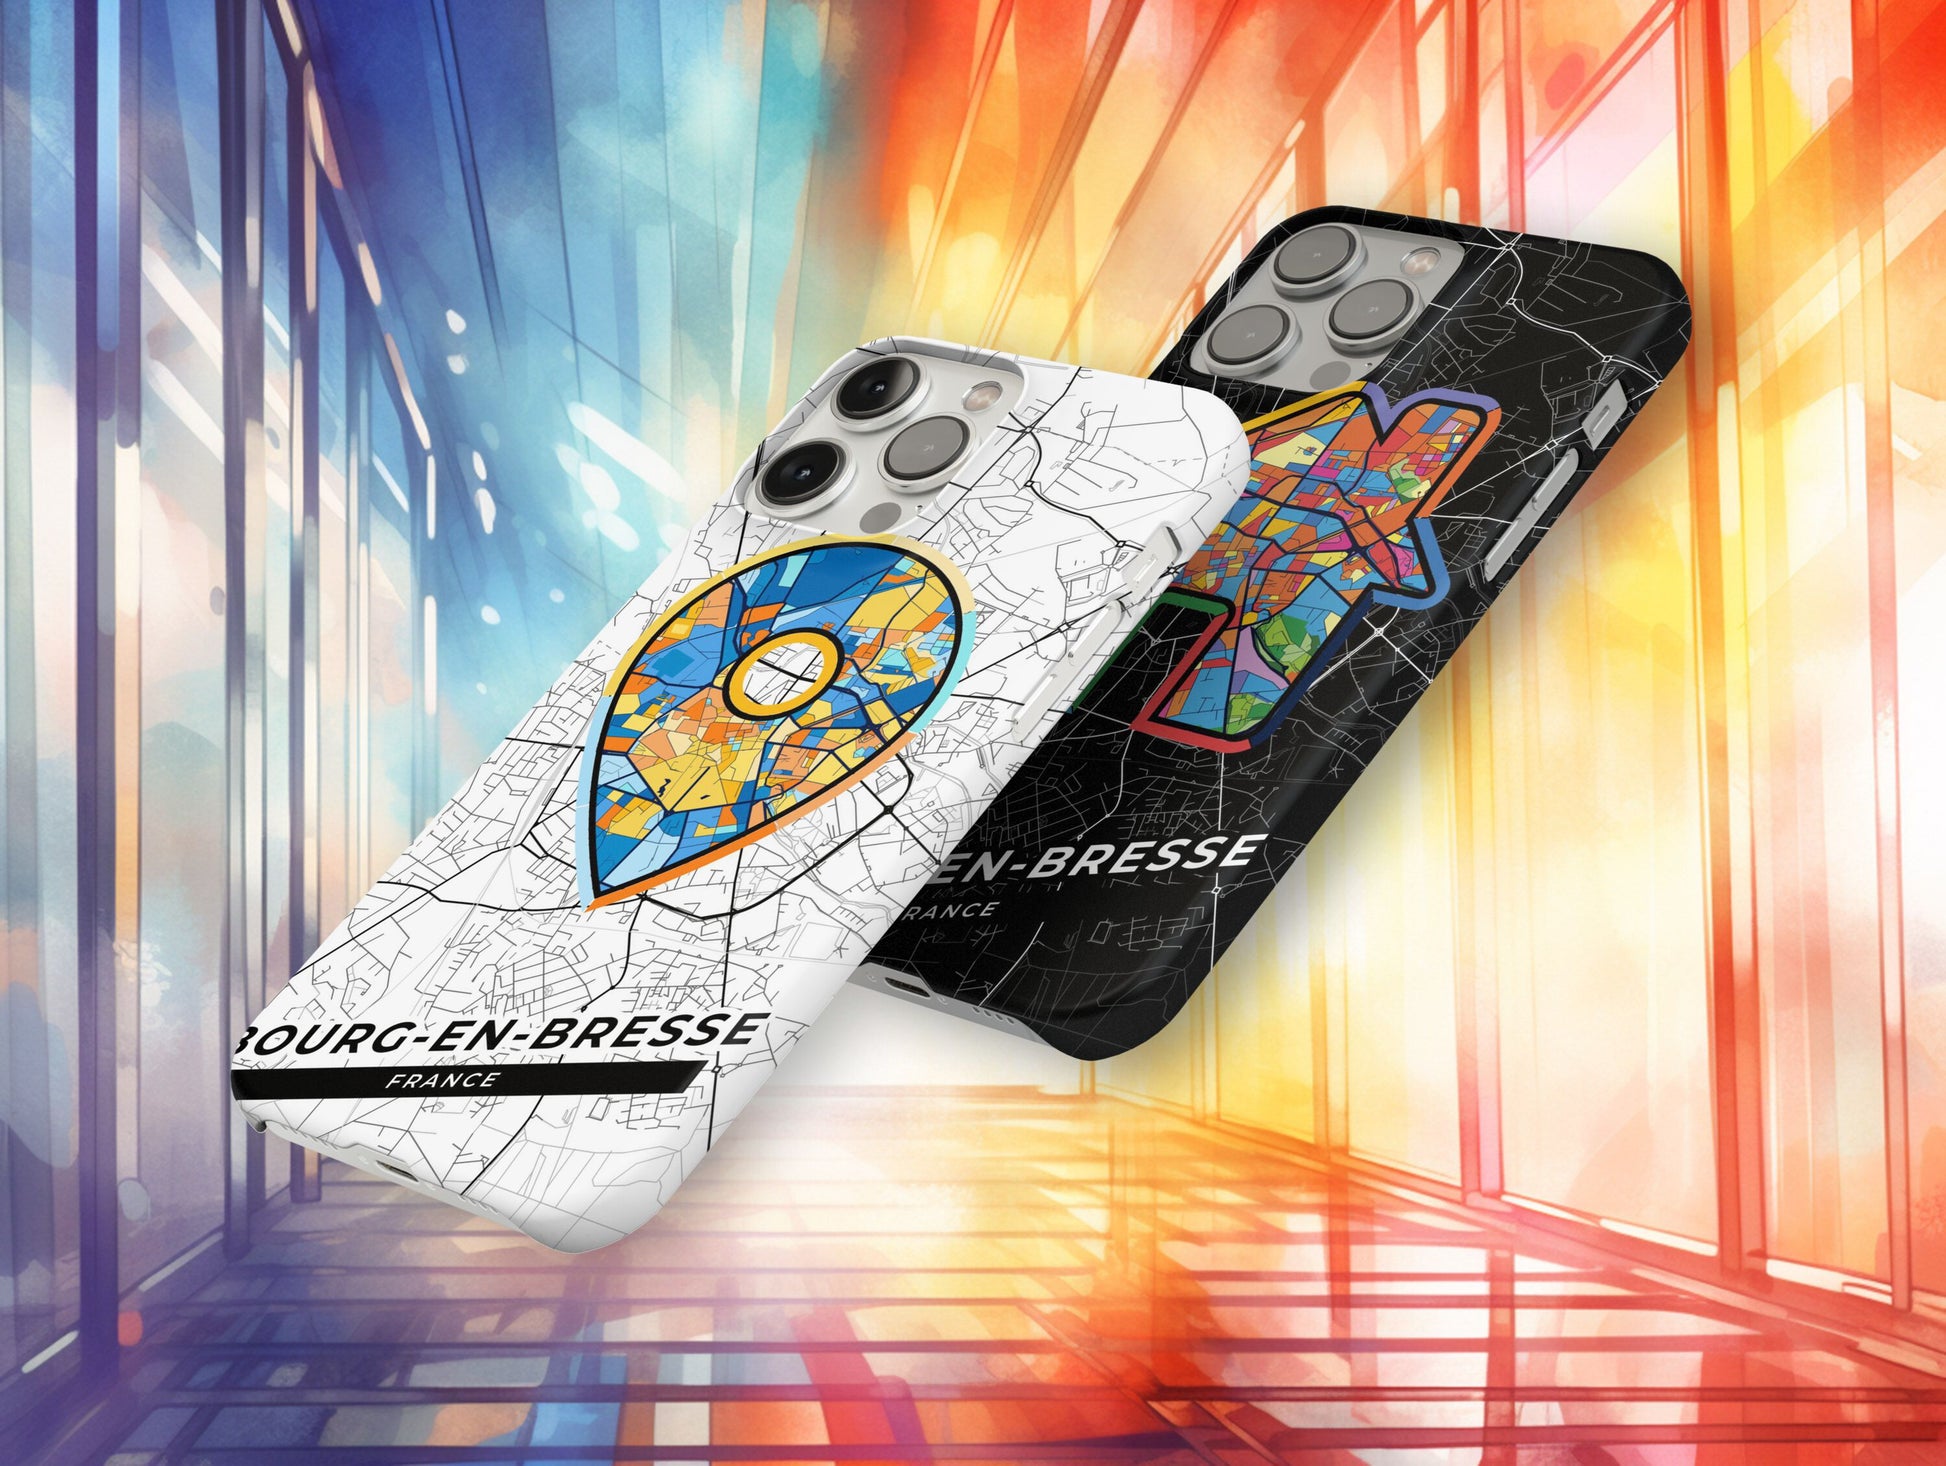 Bourg-En-Bresse France slim phone case with colorful icon. Birthday, wedding or housewarming gift. Couple match cases.